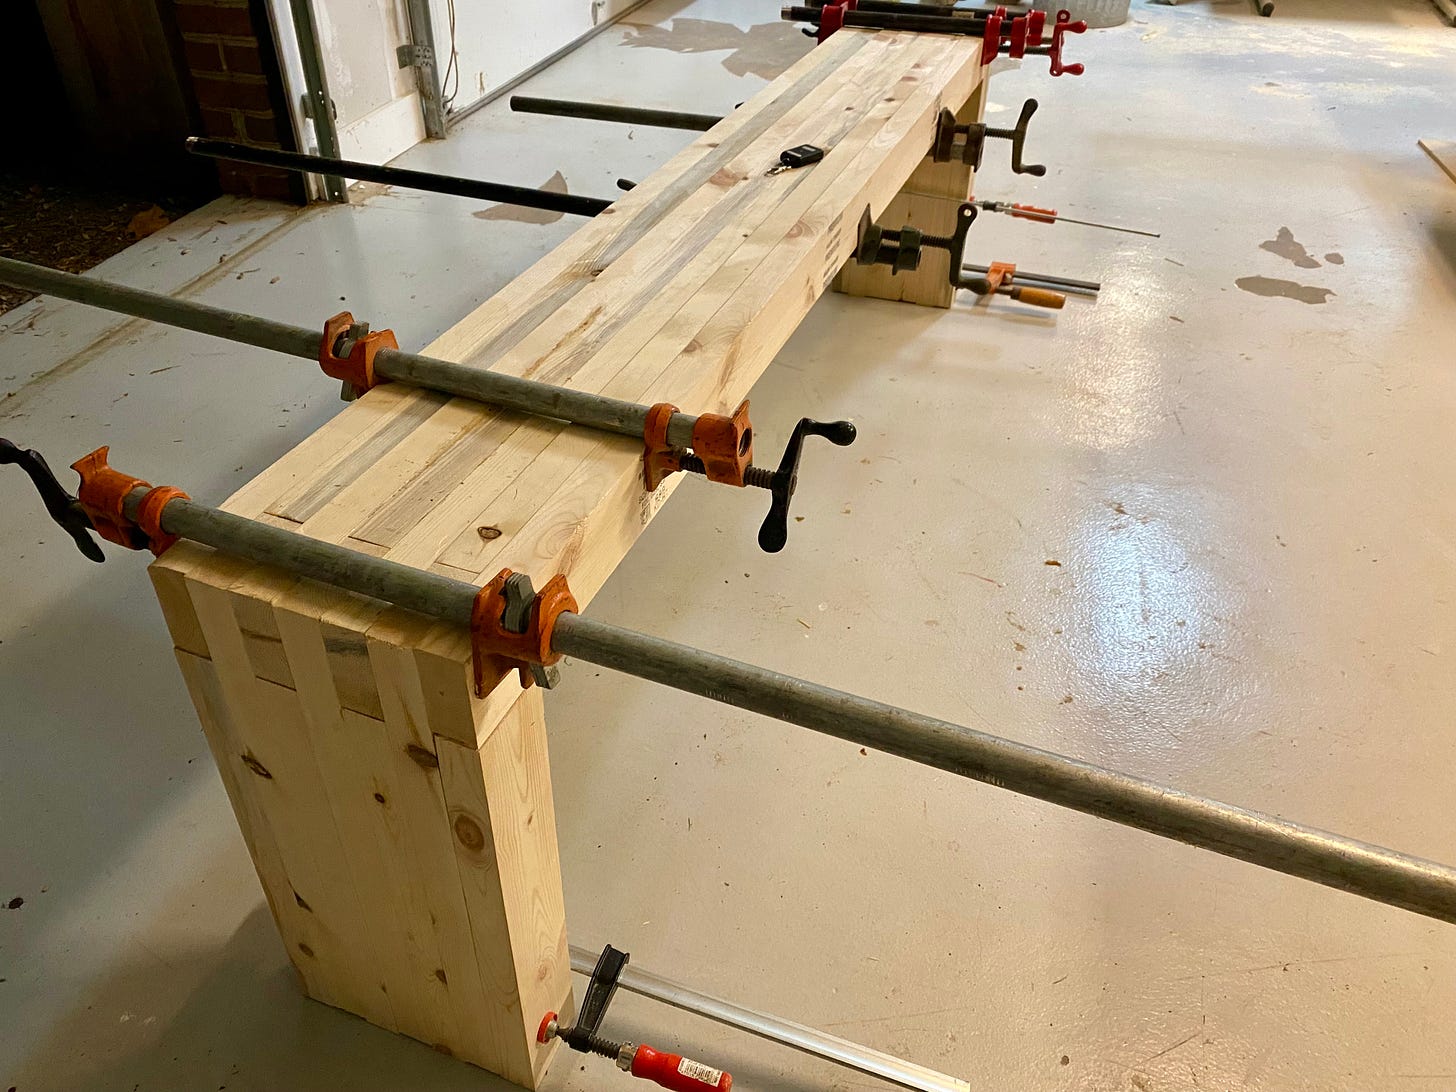 Wooden bench in clamps